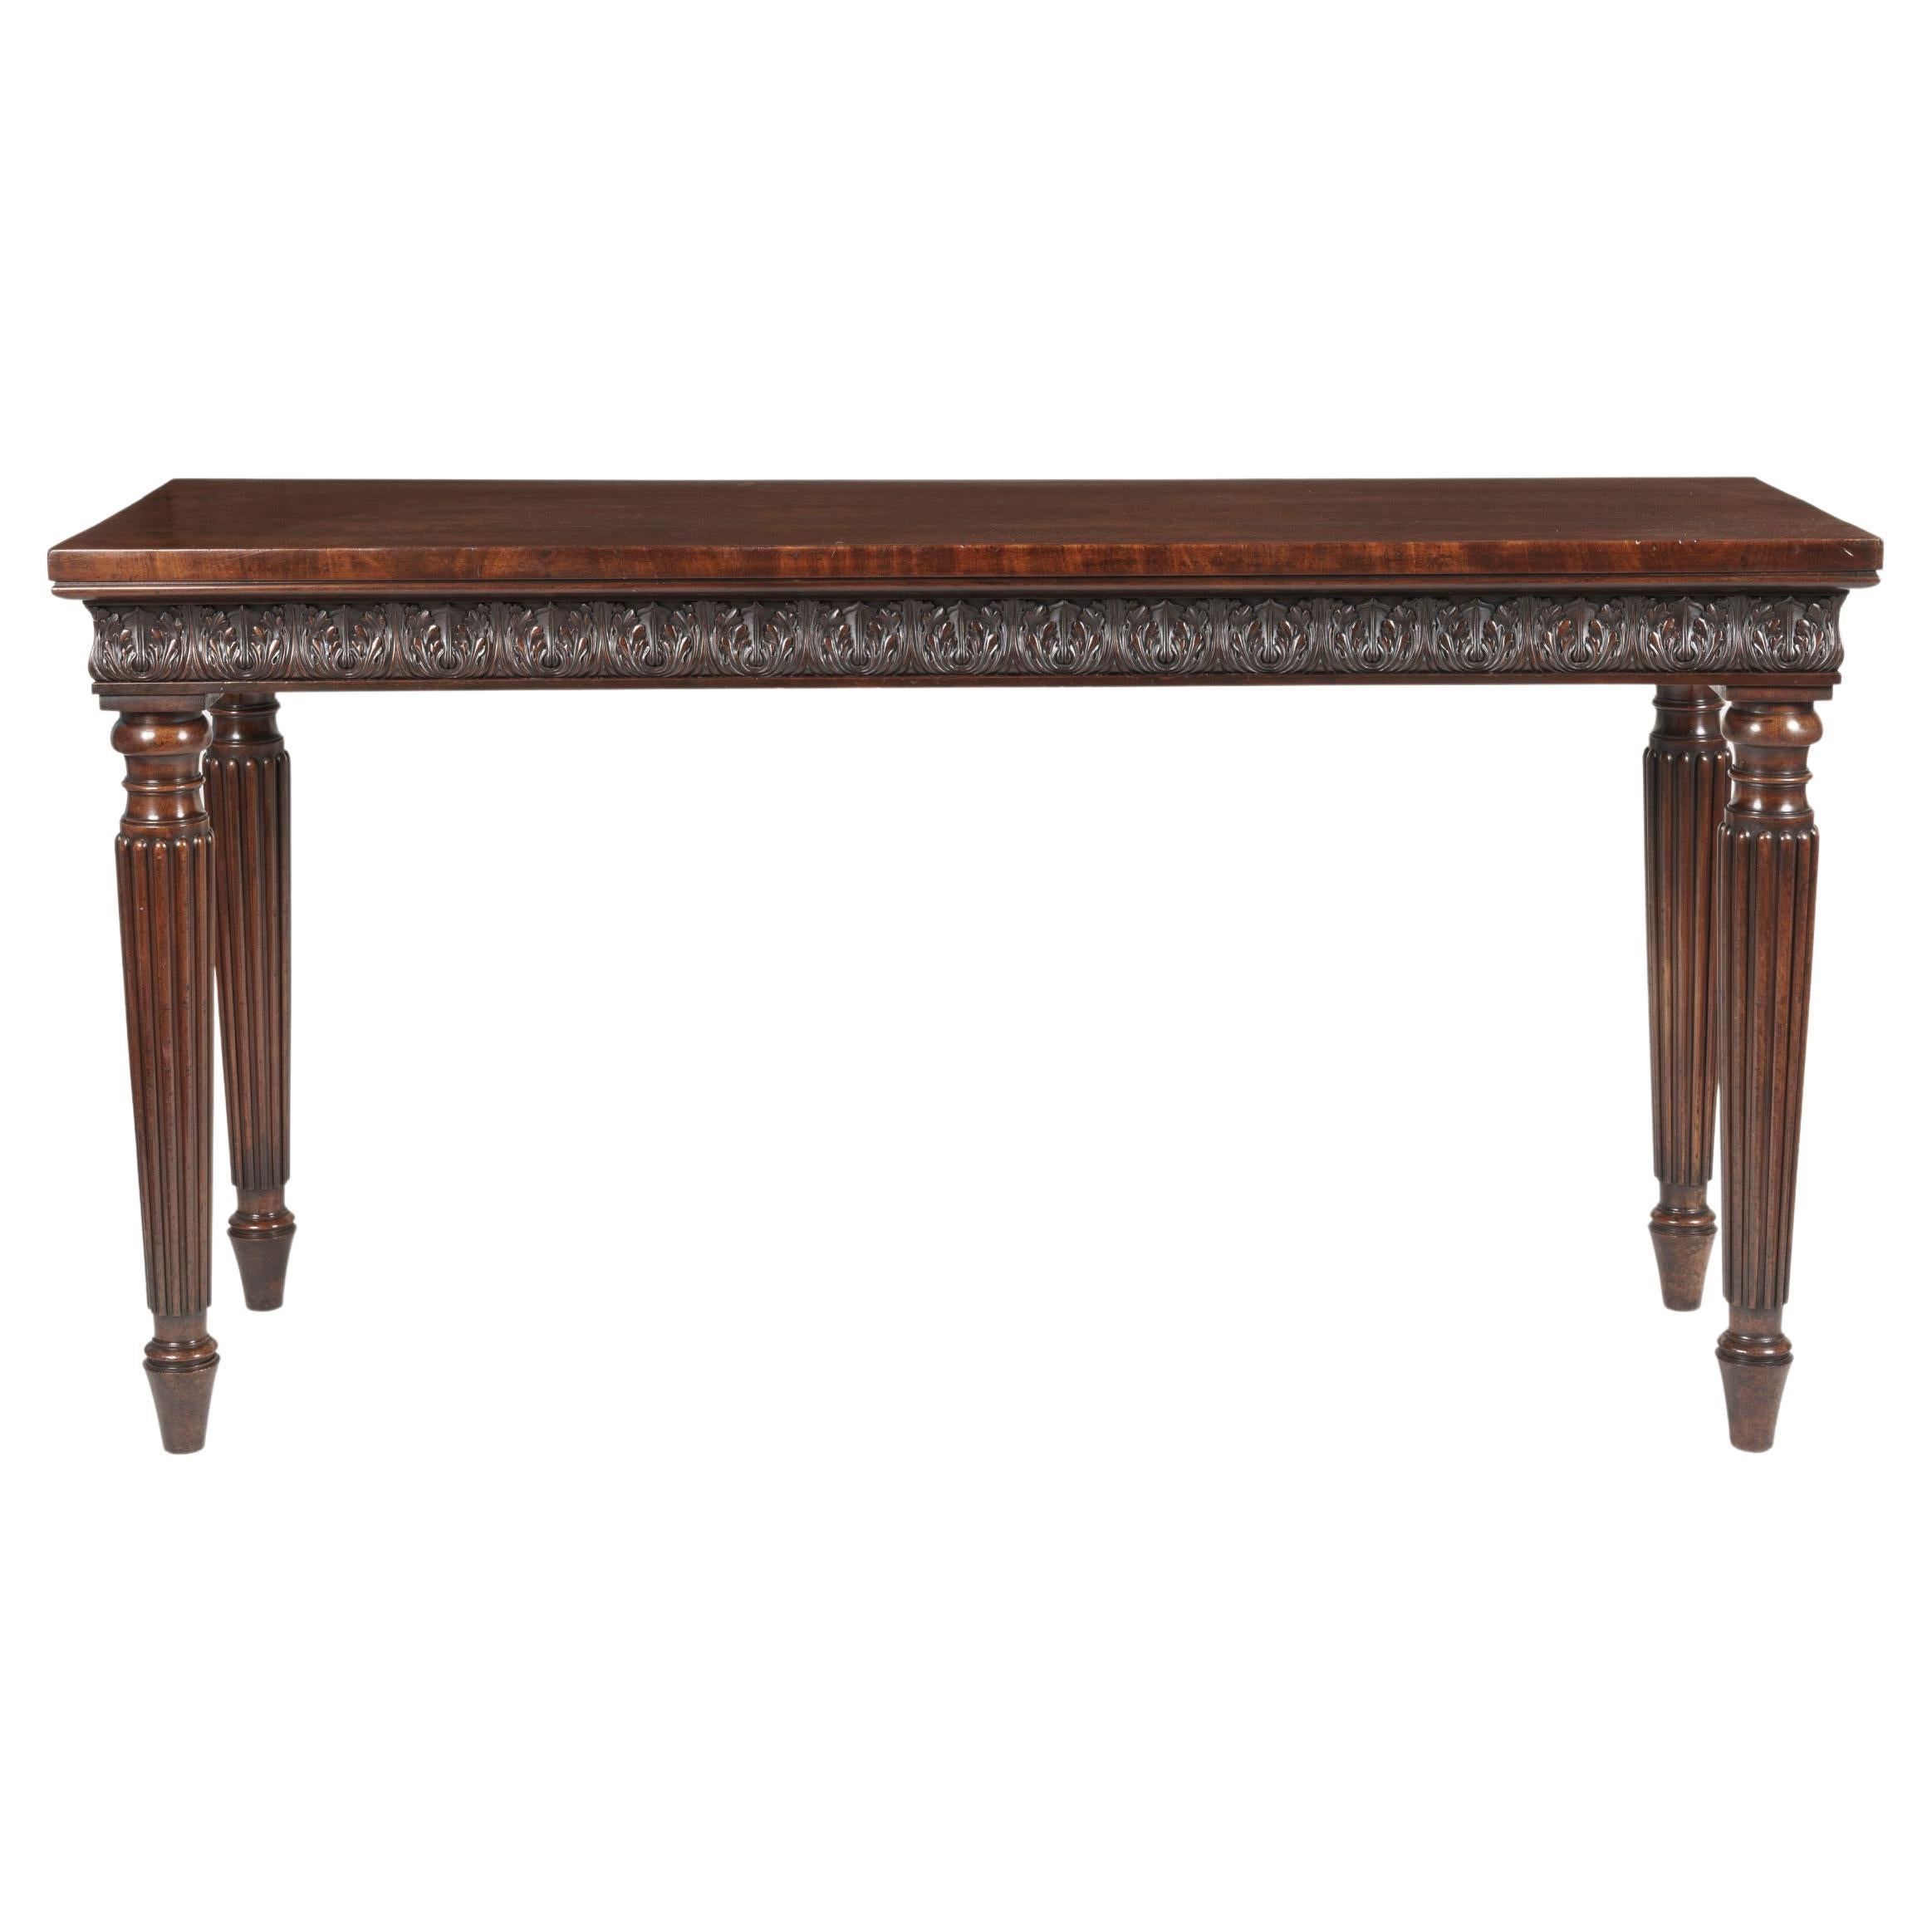 Mahogany Serving Table of the Georgian Period